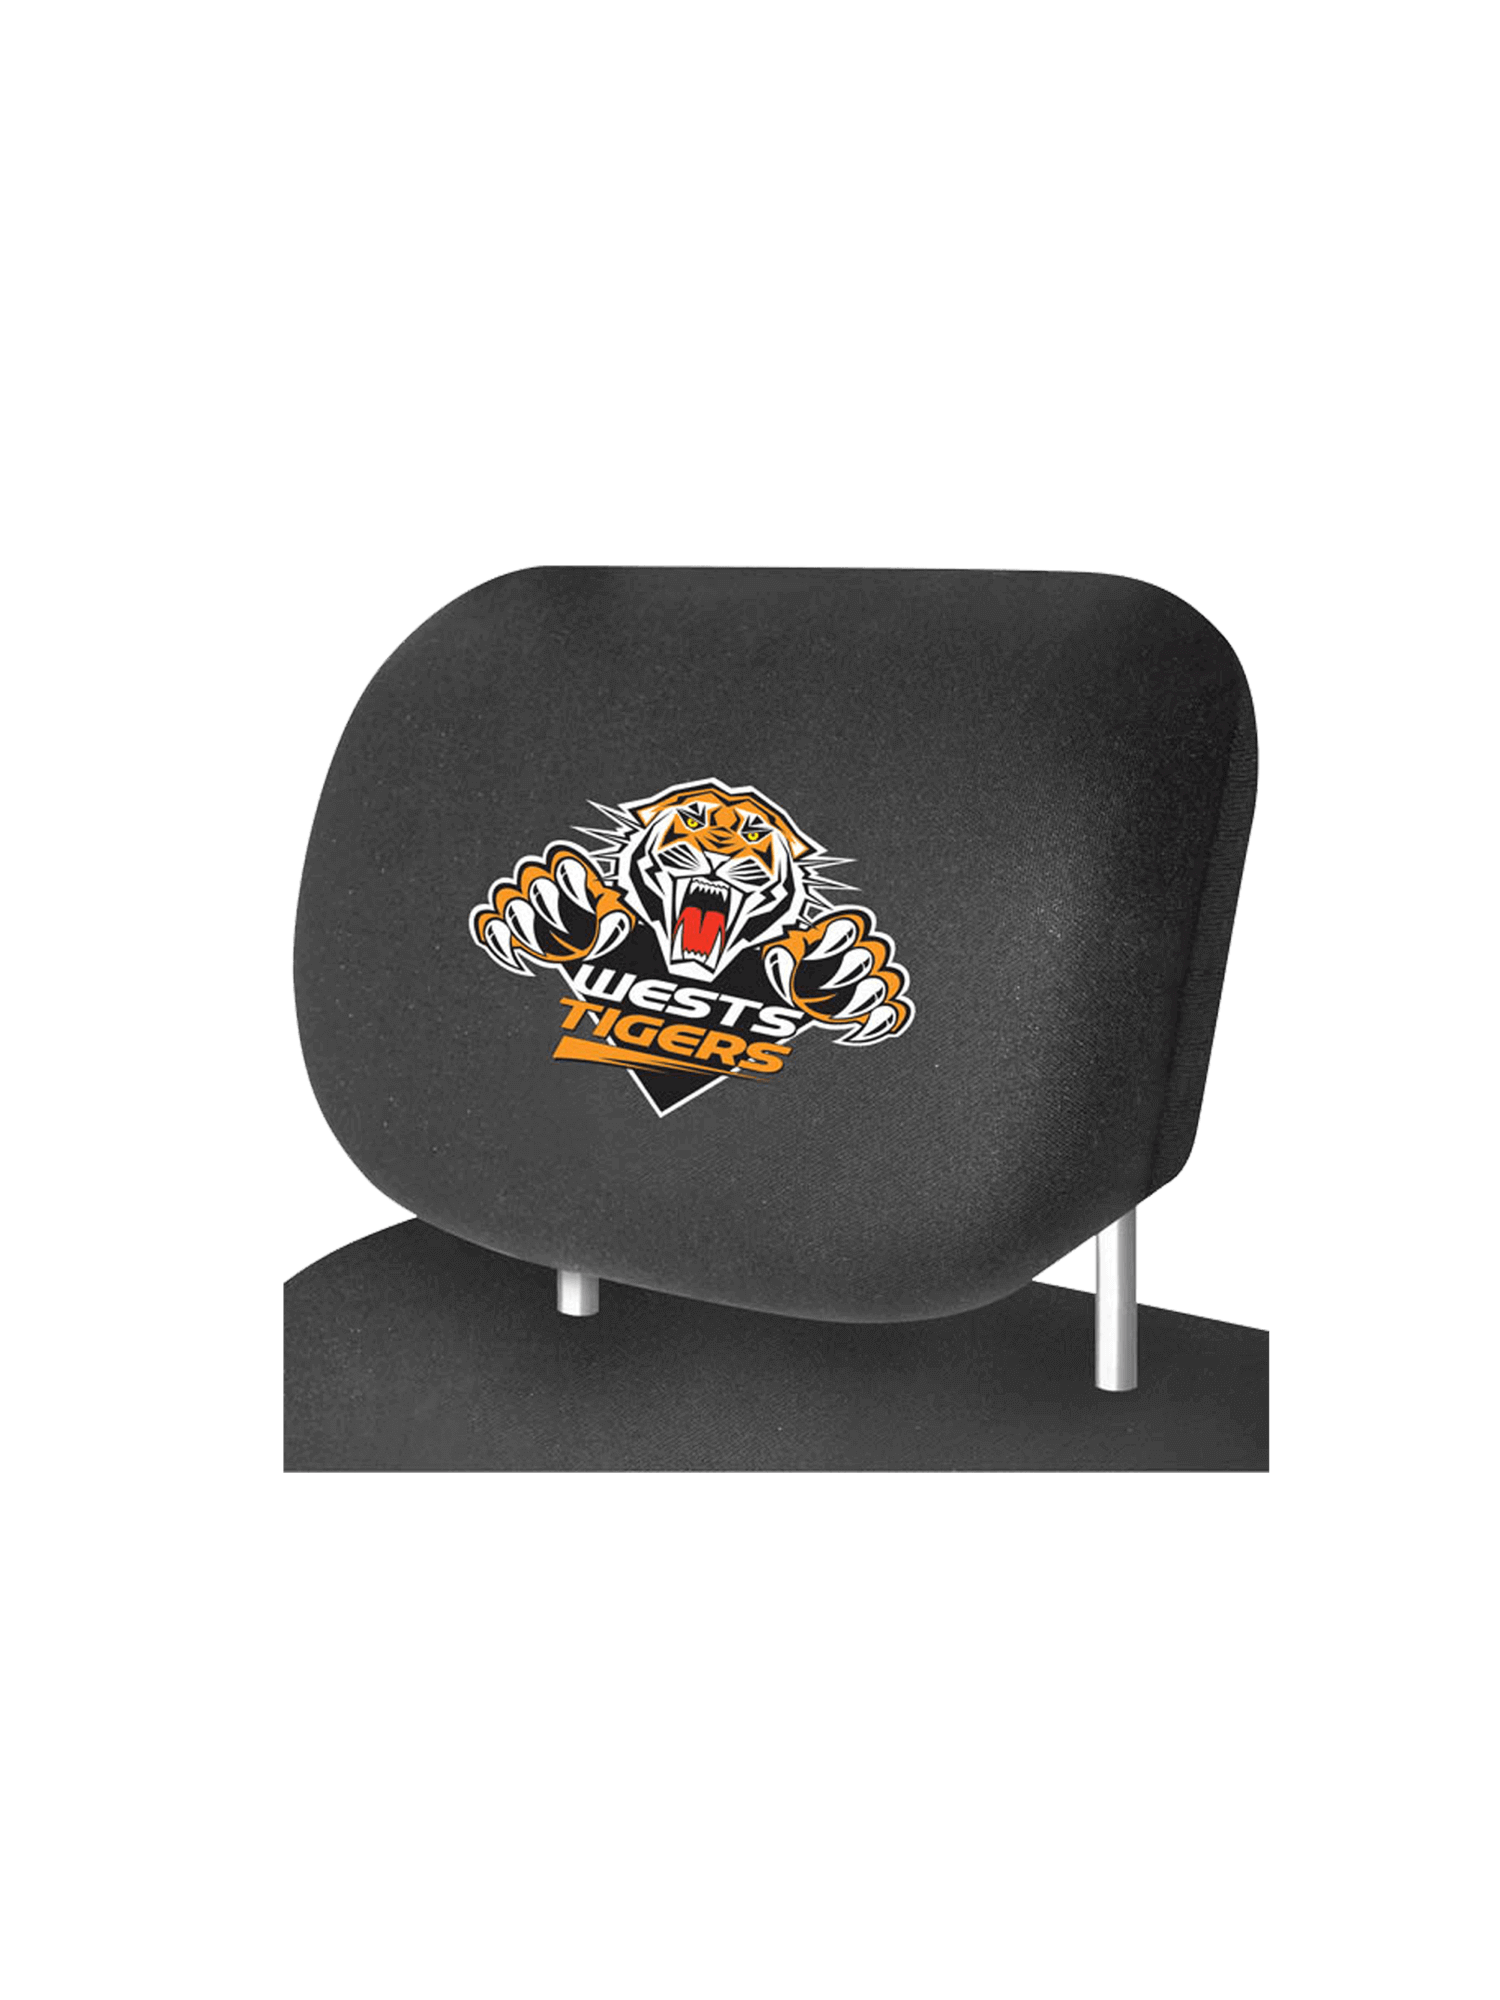 WEST TIGERS OFFICIAL HEADREST COVER_WEST TIGERS_STUBBY CLUN